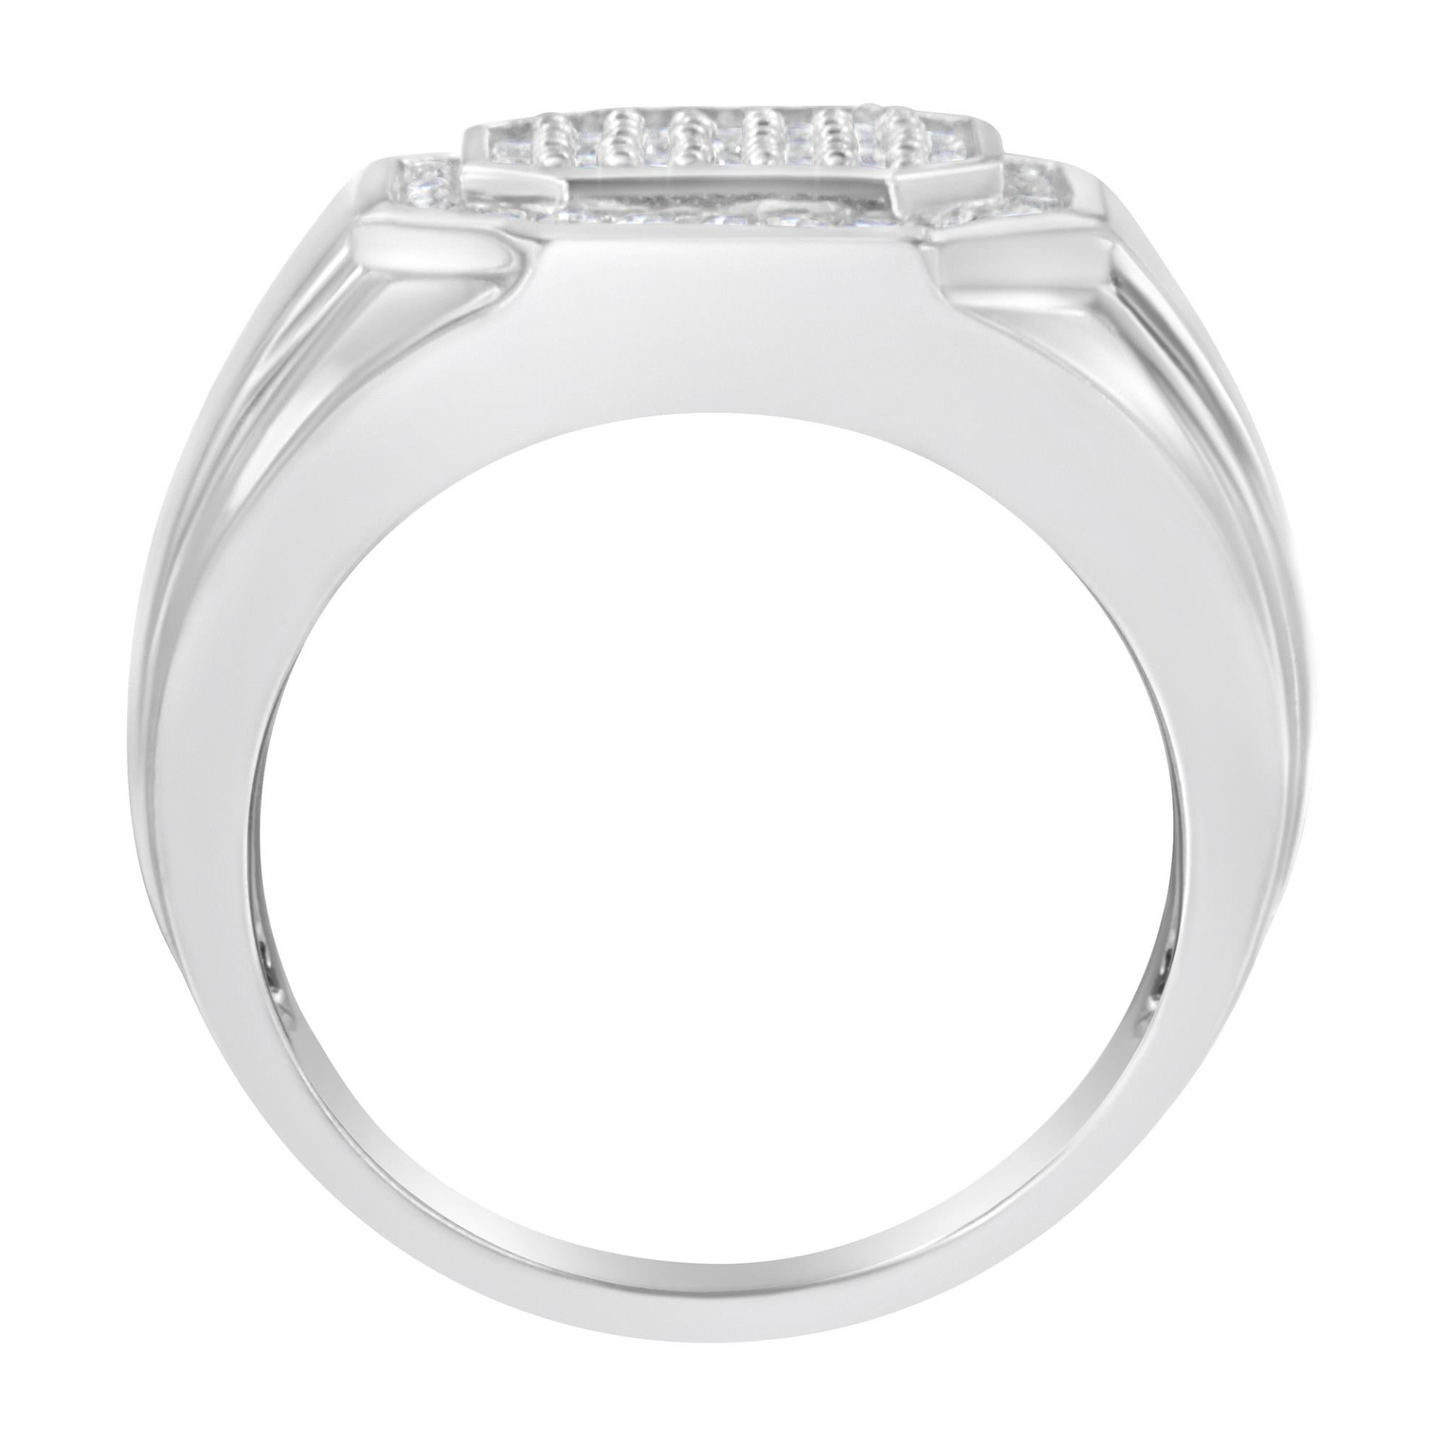 Men's 14KT White Gold Diamond Cocktail Ring (1 cttw, H-I Color, SI2-I1 Clarity), Goodies N Stuff